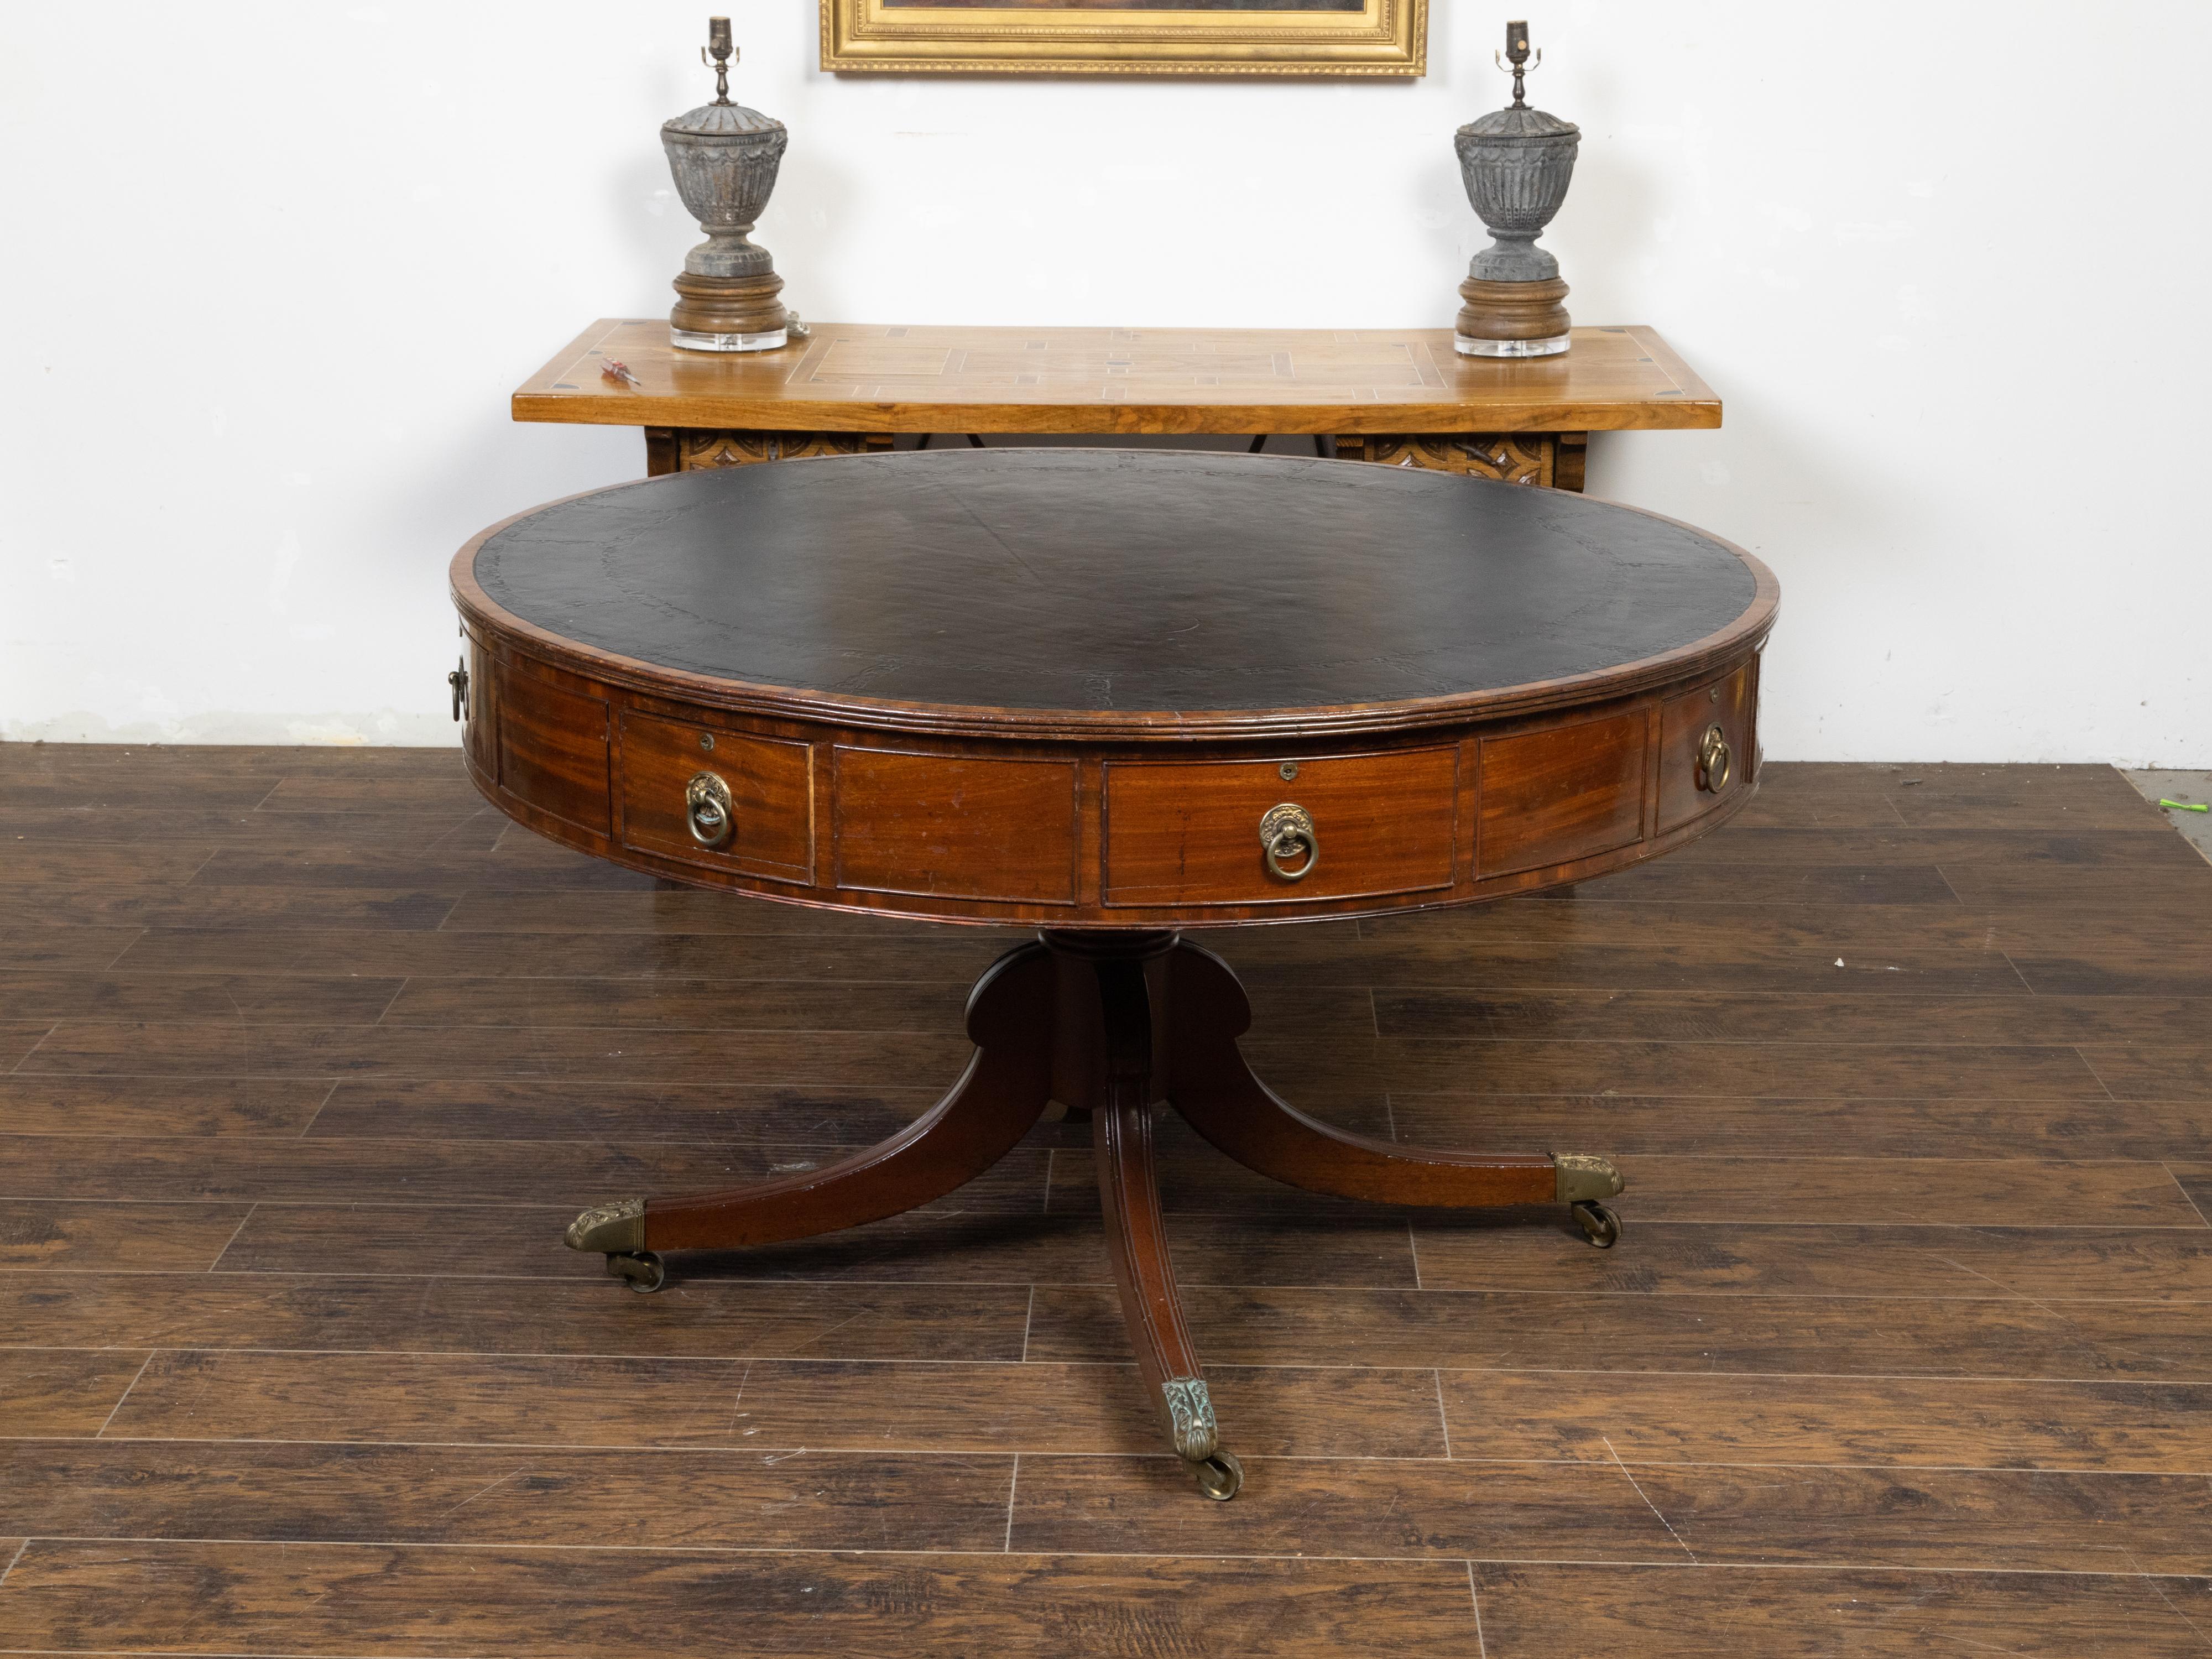 An English Regency period mahogany drum or rent table from the early 19th century, with black leather top, eight drawers, pedestal and quadripartite base on bronze feet. Created in England during the second quarter of the 19th century, this Regency